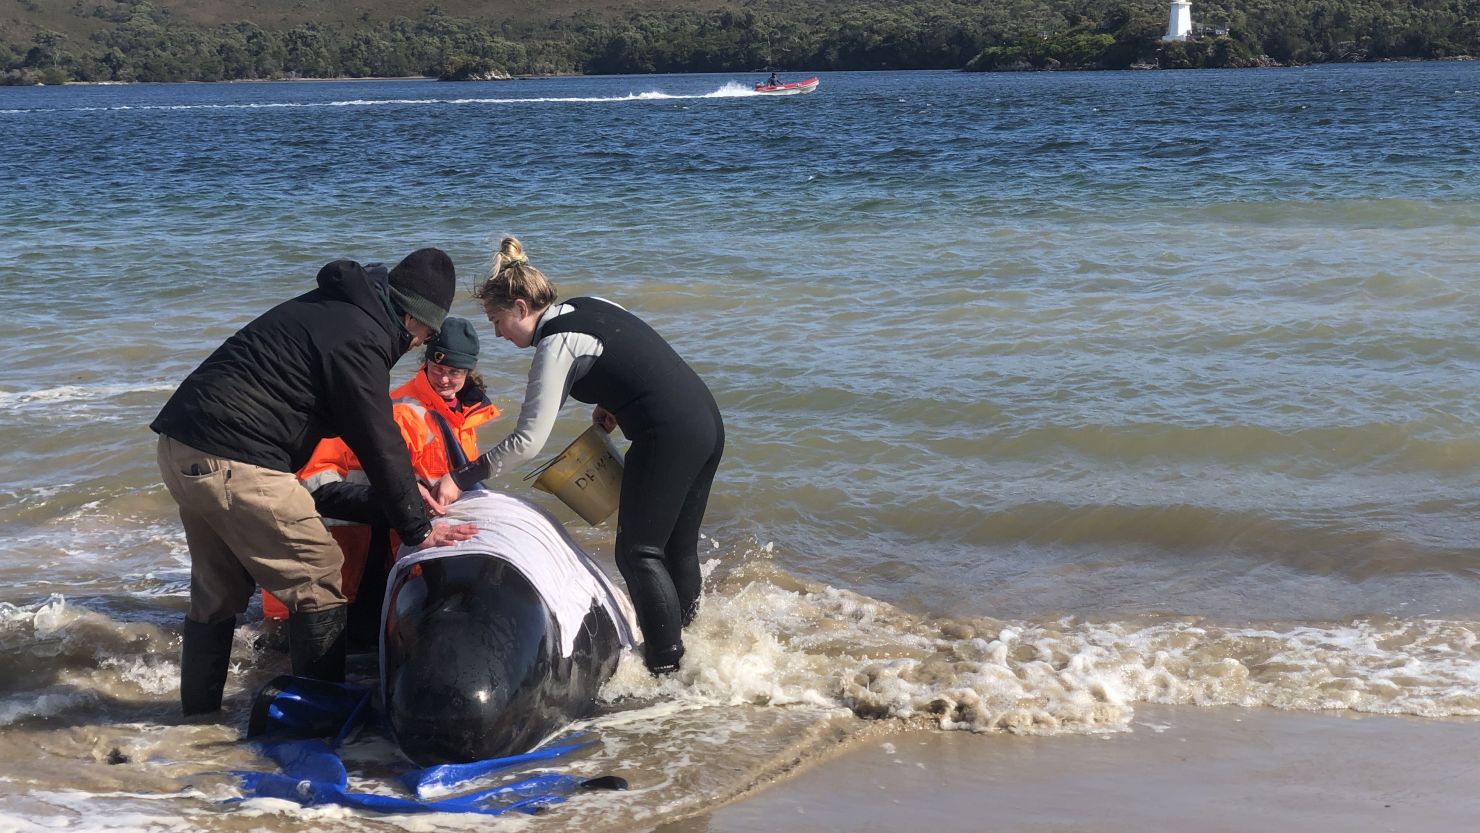 Rescue teams in Tasmania, Australia, working to rescue hundreds of stranded pilot whales on September 22.